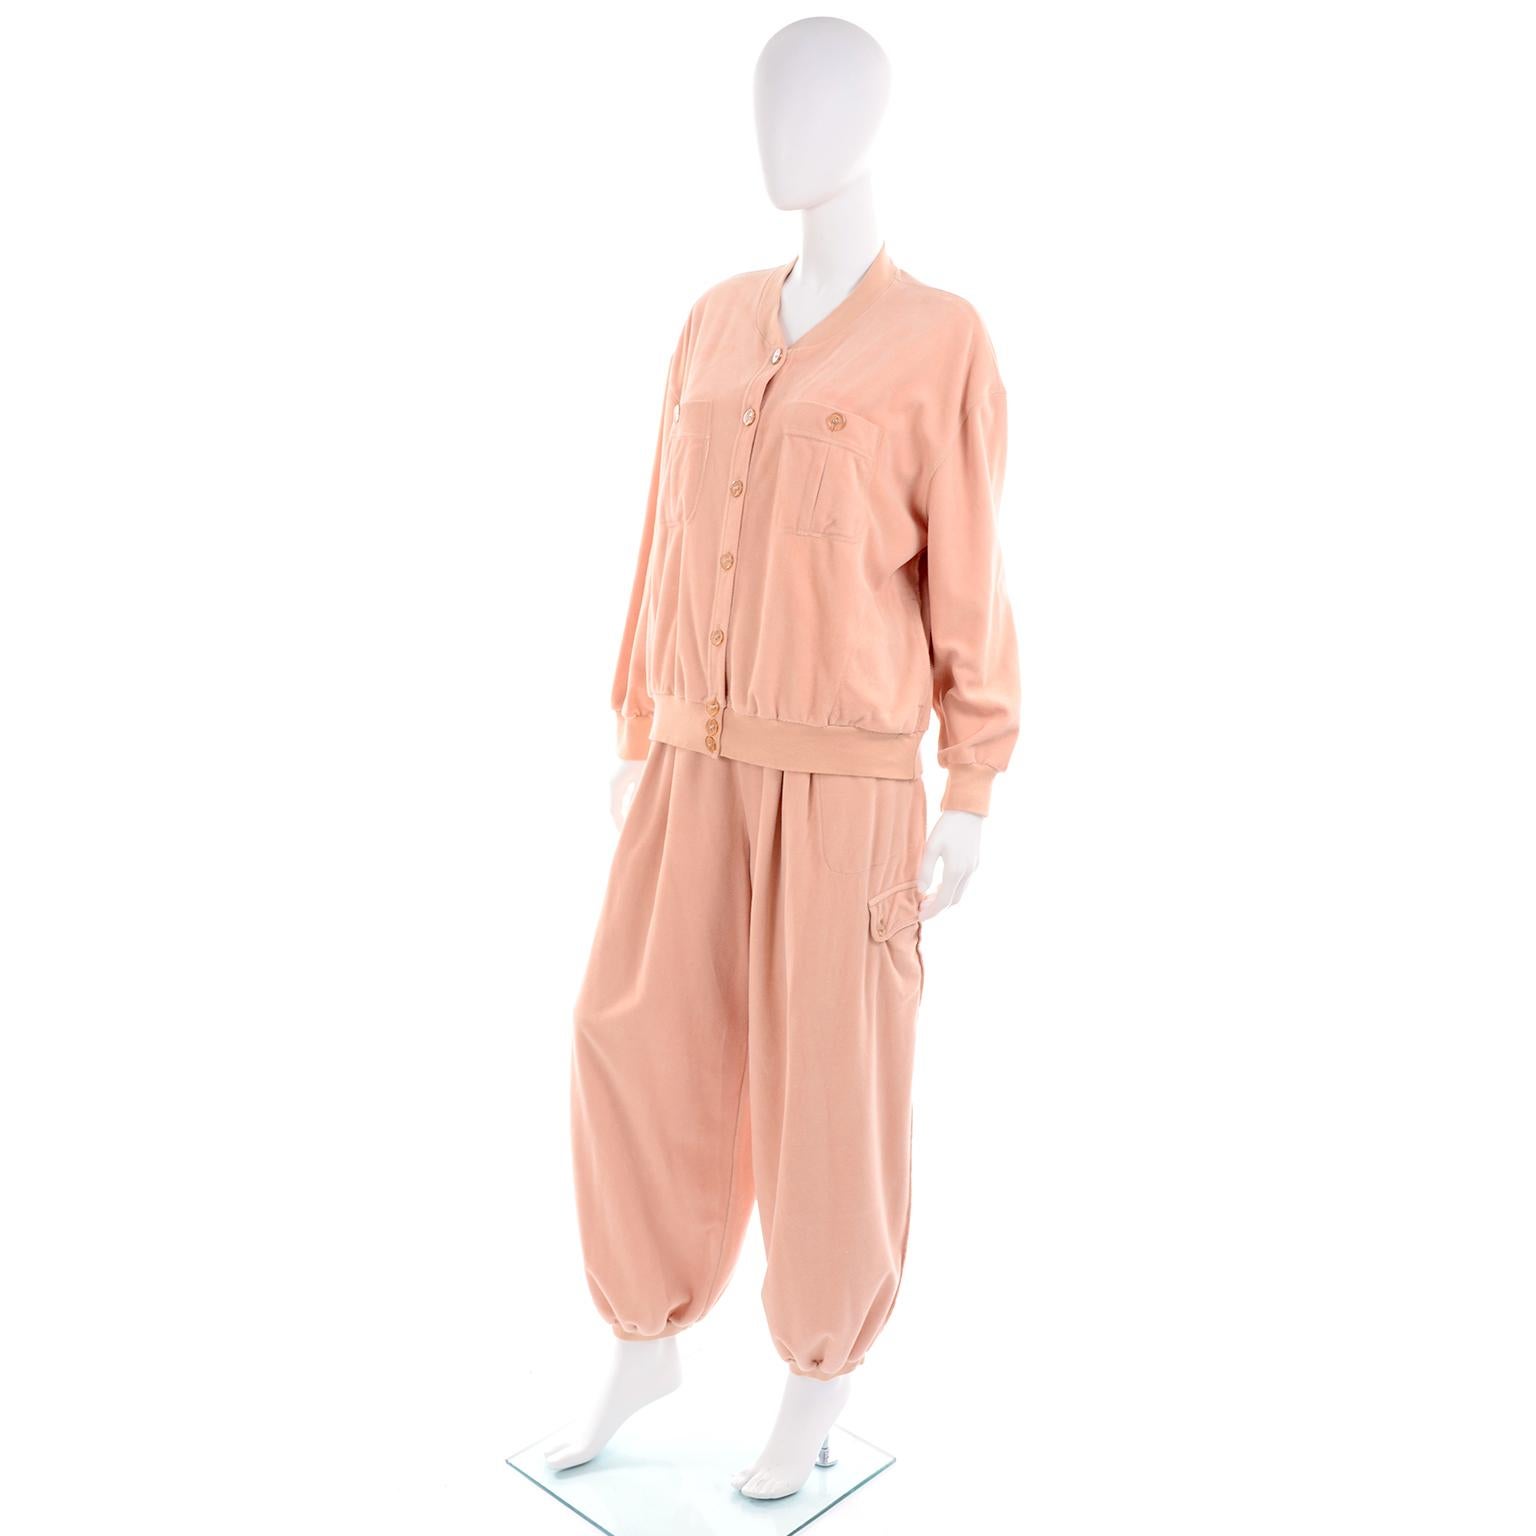 This vintage Sonia Rykiel athleisure tracksuit style outfit came from an estate of some of the most incredible 1980's and 1990's designer vintage clothing we've ever seen!  If you've never worn one of these outfits, Sonia Rykiel made the most